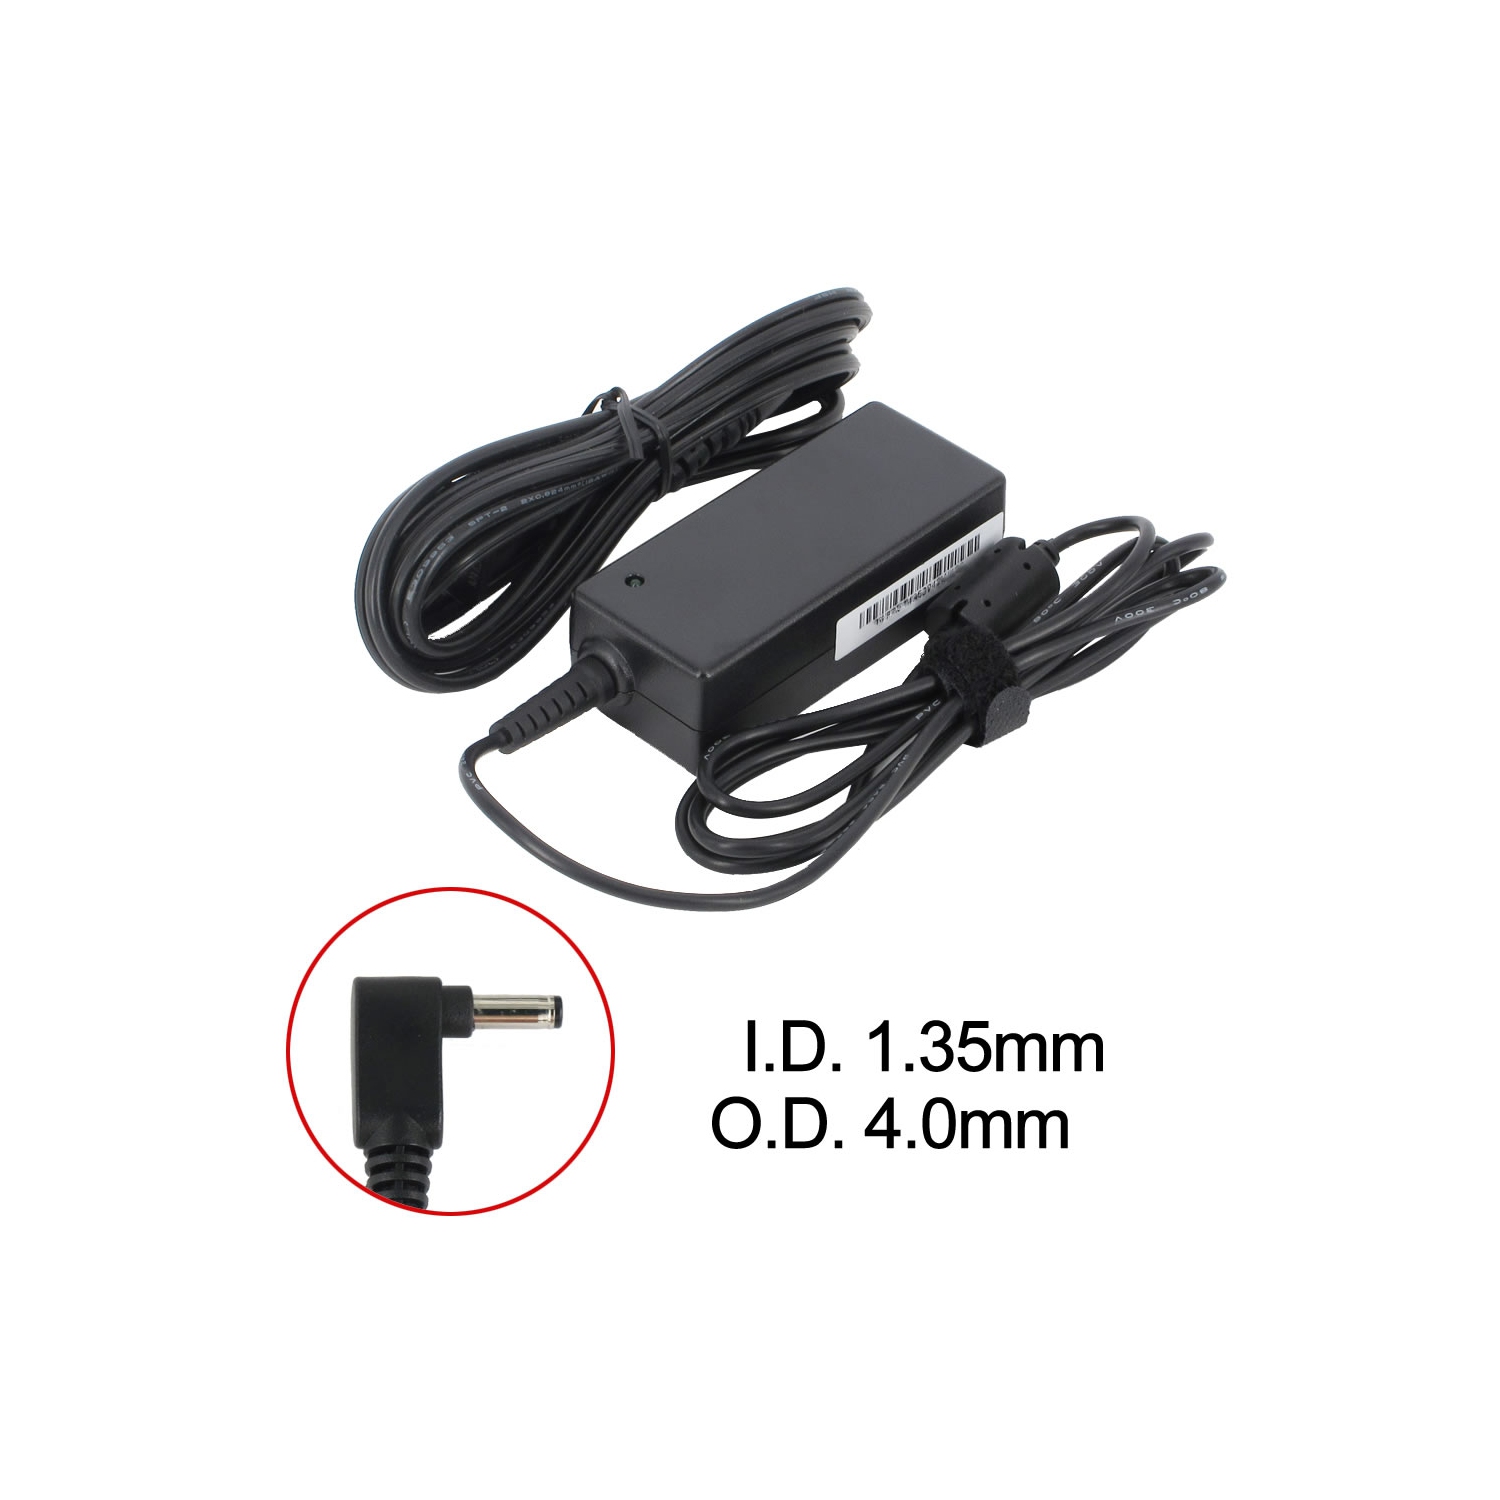 BattDepot: New Laptop AC Adapter for Asus X541UA-3H, 0A001-00230300, 0A001-00233100, EXA1206CH, W15-065N1A